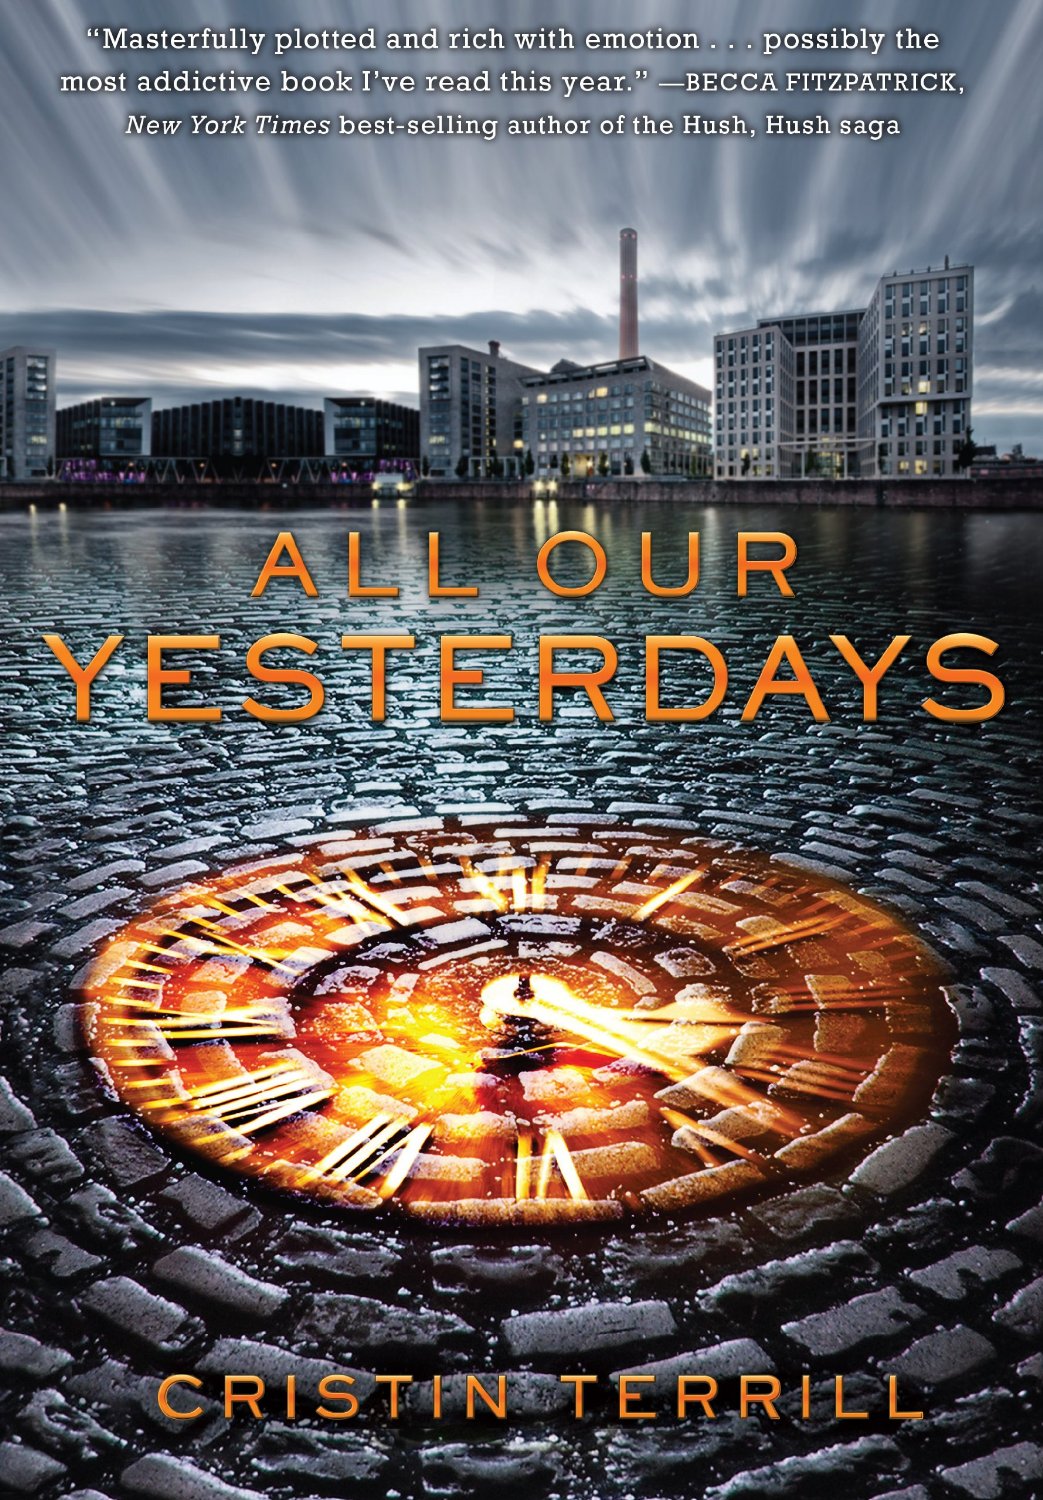 all our yesterdays book cover cristin terrill